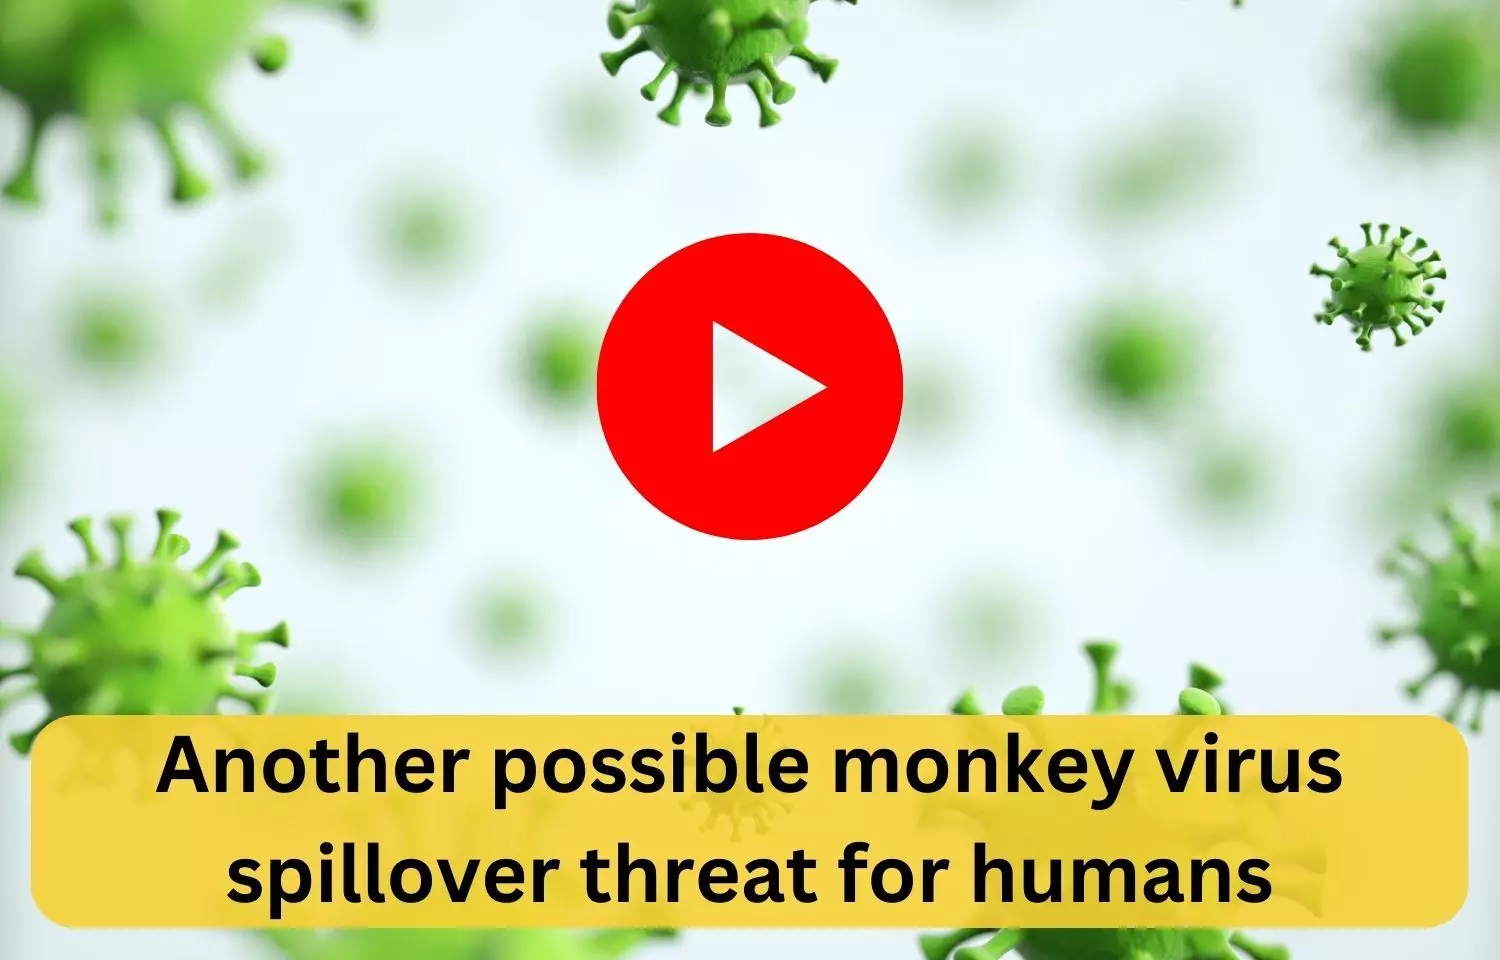 Another possible monkey virus spillover threat for humans